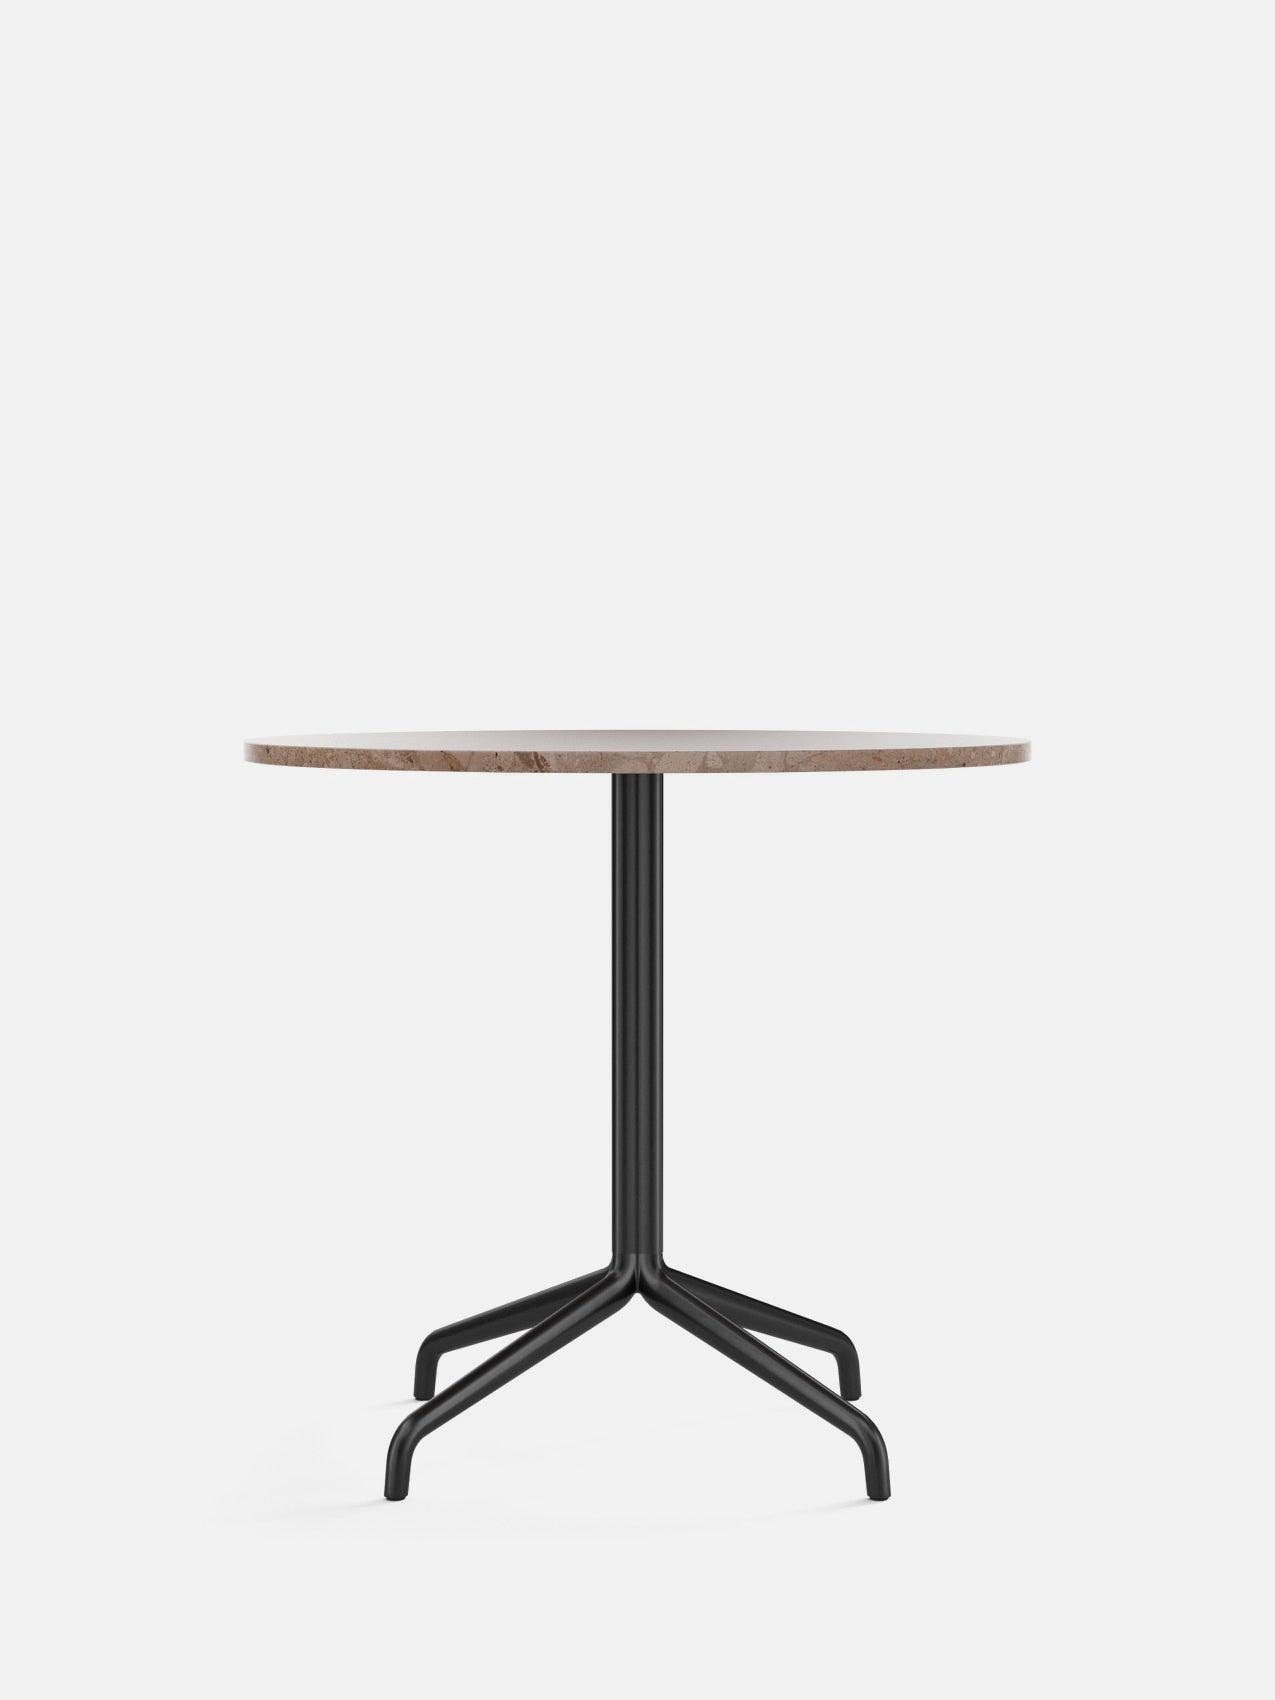 Harbour Column Table, Round Table Top-Café Table-Norm Architects-Dining Height (28.7in) - Star Base-Round 32in - Sand Stone-menu-minimalist-modern-danish-design-home-decor